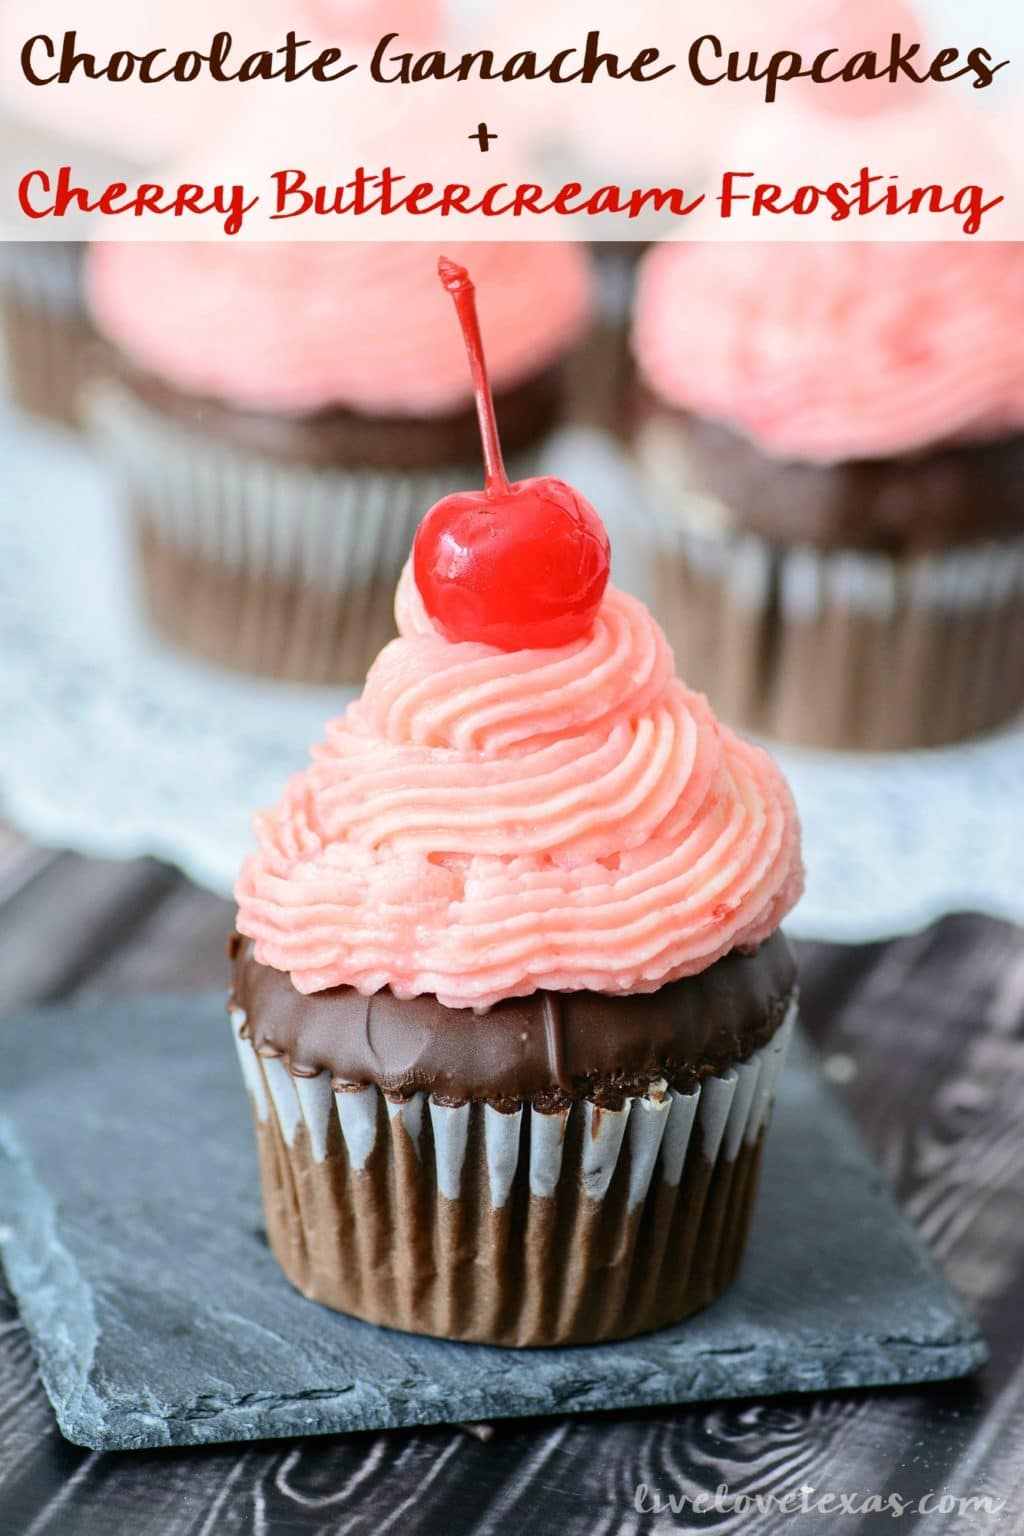 Chocolate Ganache Cupcakes Recipe with Cherry Buttercream Frosting Pinnable